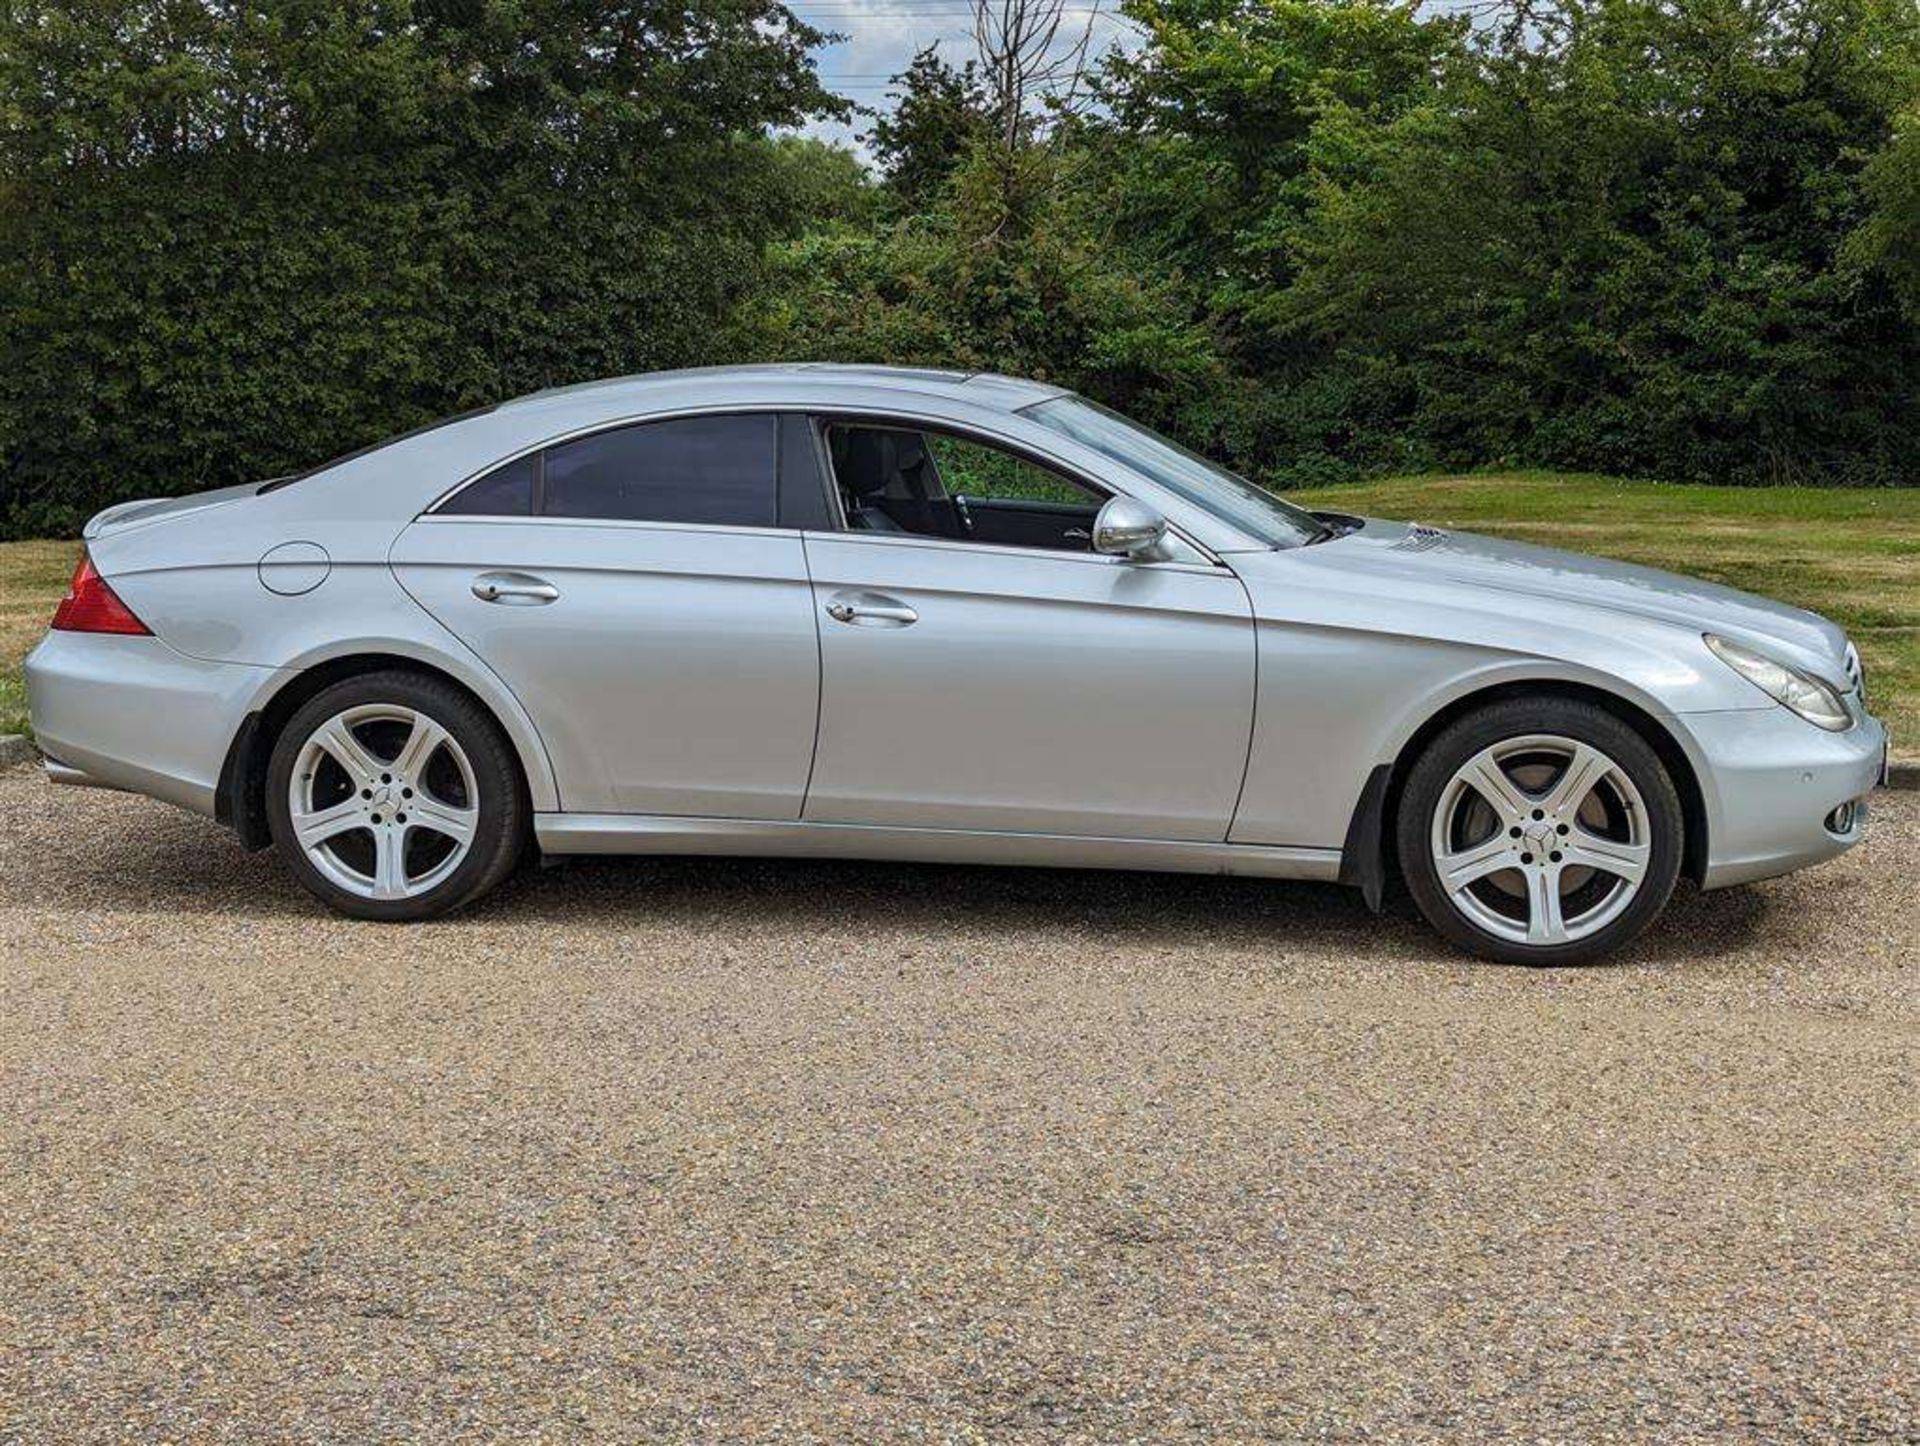 2005 MERCEDES CLS 500 AUTO - Image 8 of 29